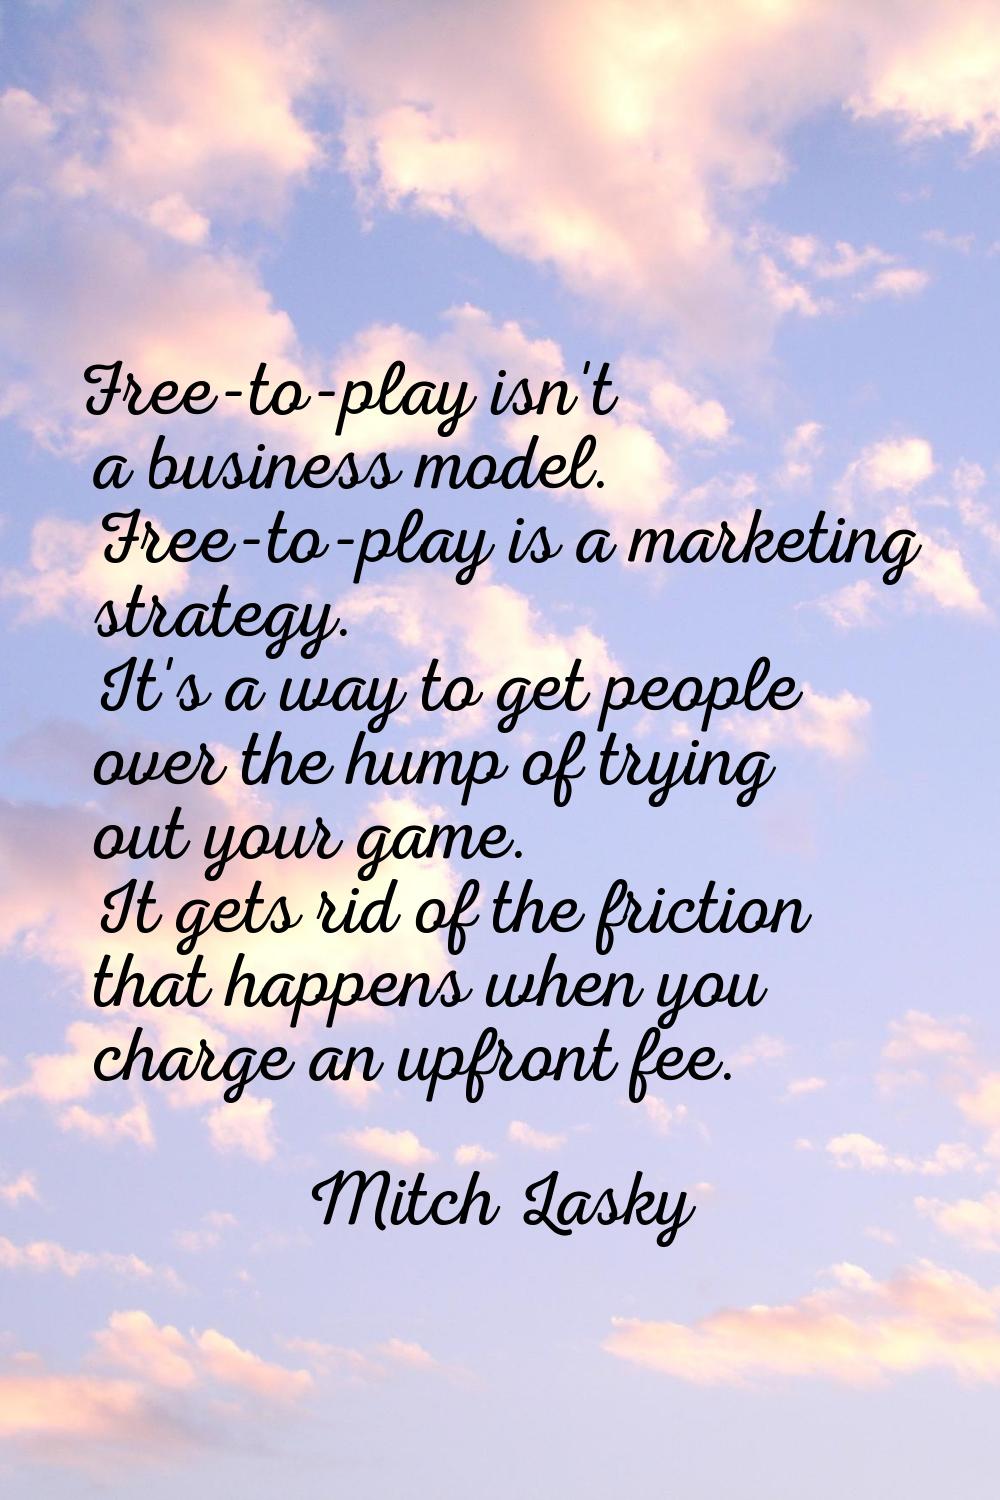 Free-to-play isn't a business model. Free-to-play is a marketing strategy. It's a way to get people